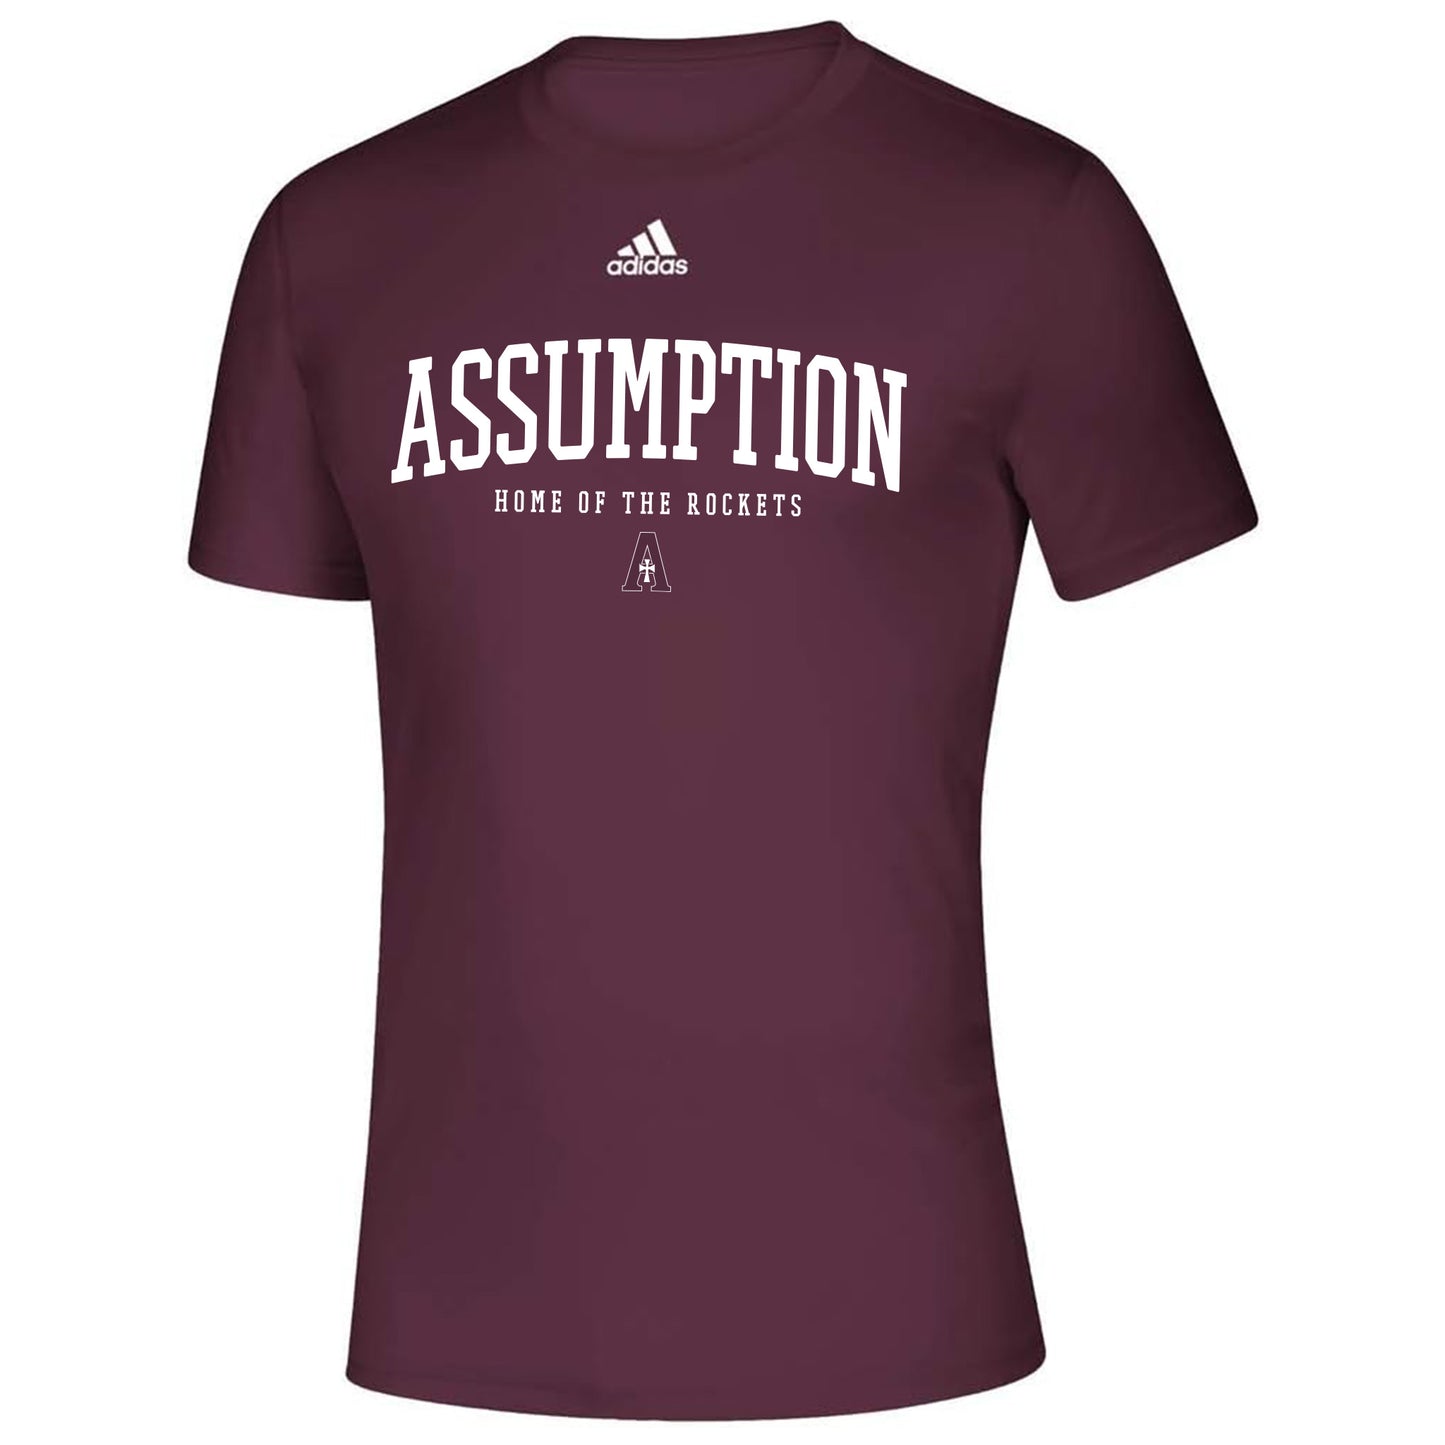 T-shirt - Maroon - Adidas Dry Fit - Home of the Rockets (Ladies, Unisex and Youth)